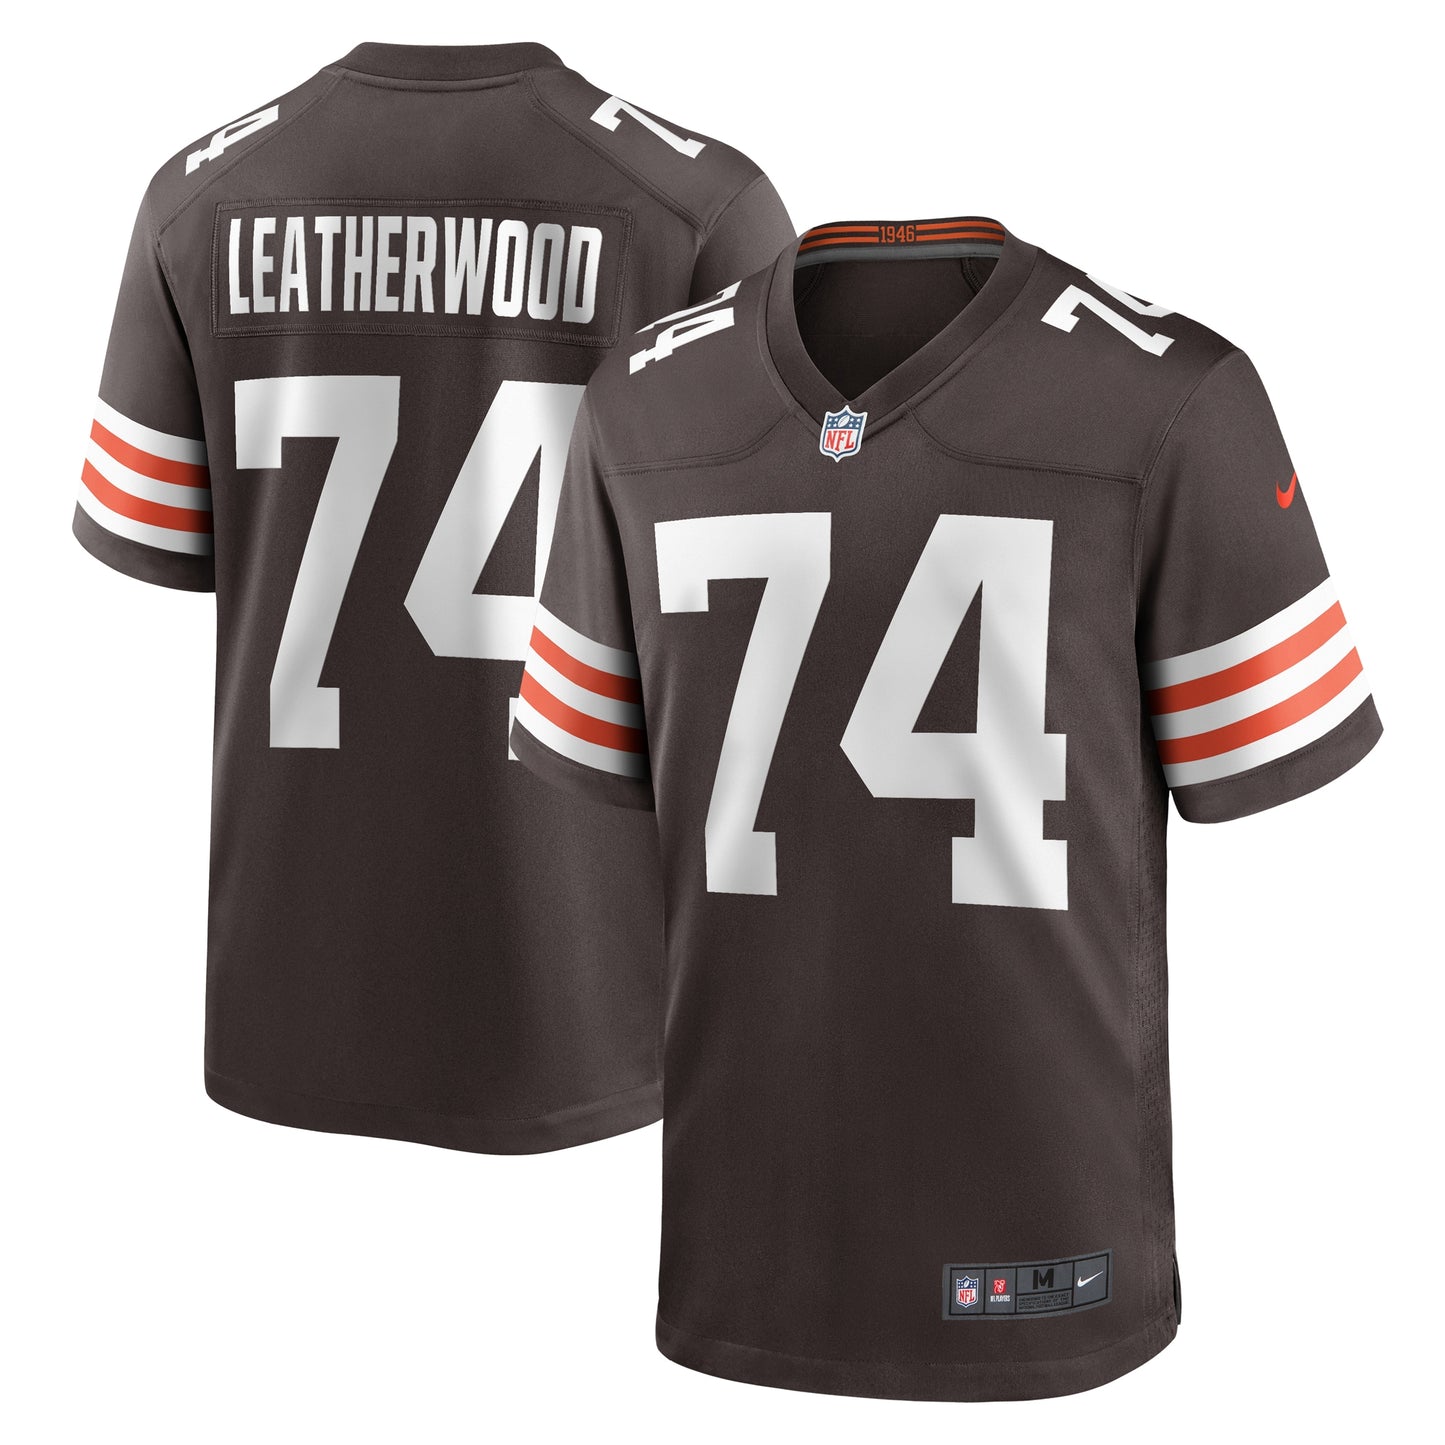 Alex Leatherwood Cleveland Browns Nike Team Game Jersey - Brown